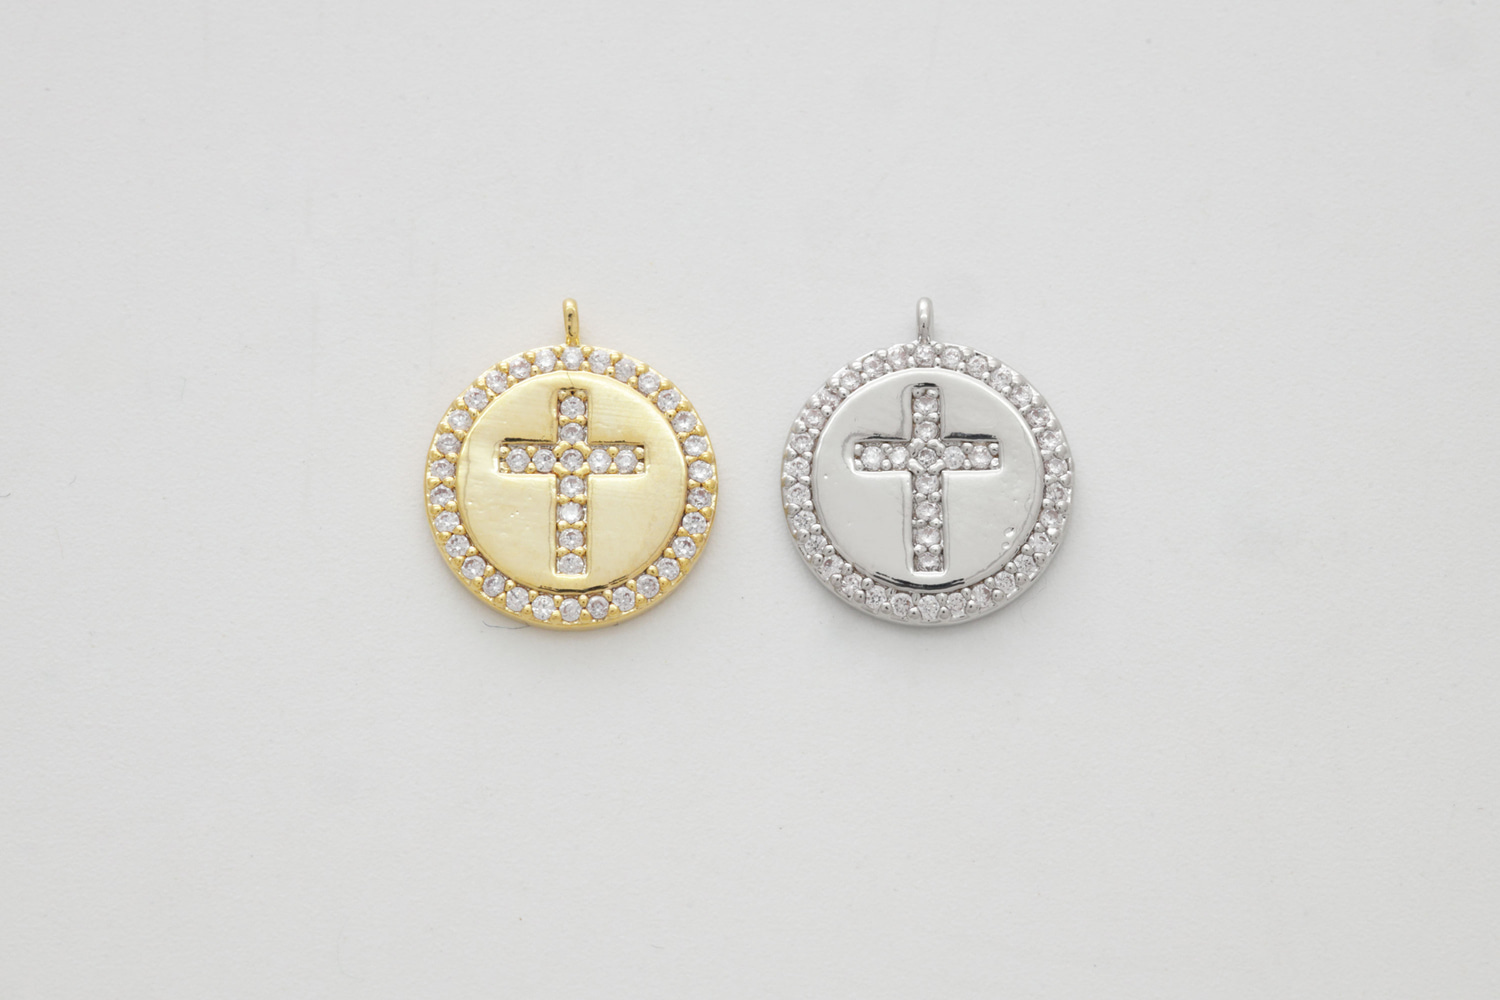 [M8-VC2] Cubic round cross charm, Brass, Cubic zirconia, Nickel free, Unique charm, Jewelry making supplies, Wholesale jewelry, 1 piece (M8-G6, M8-G6R)